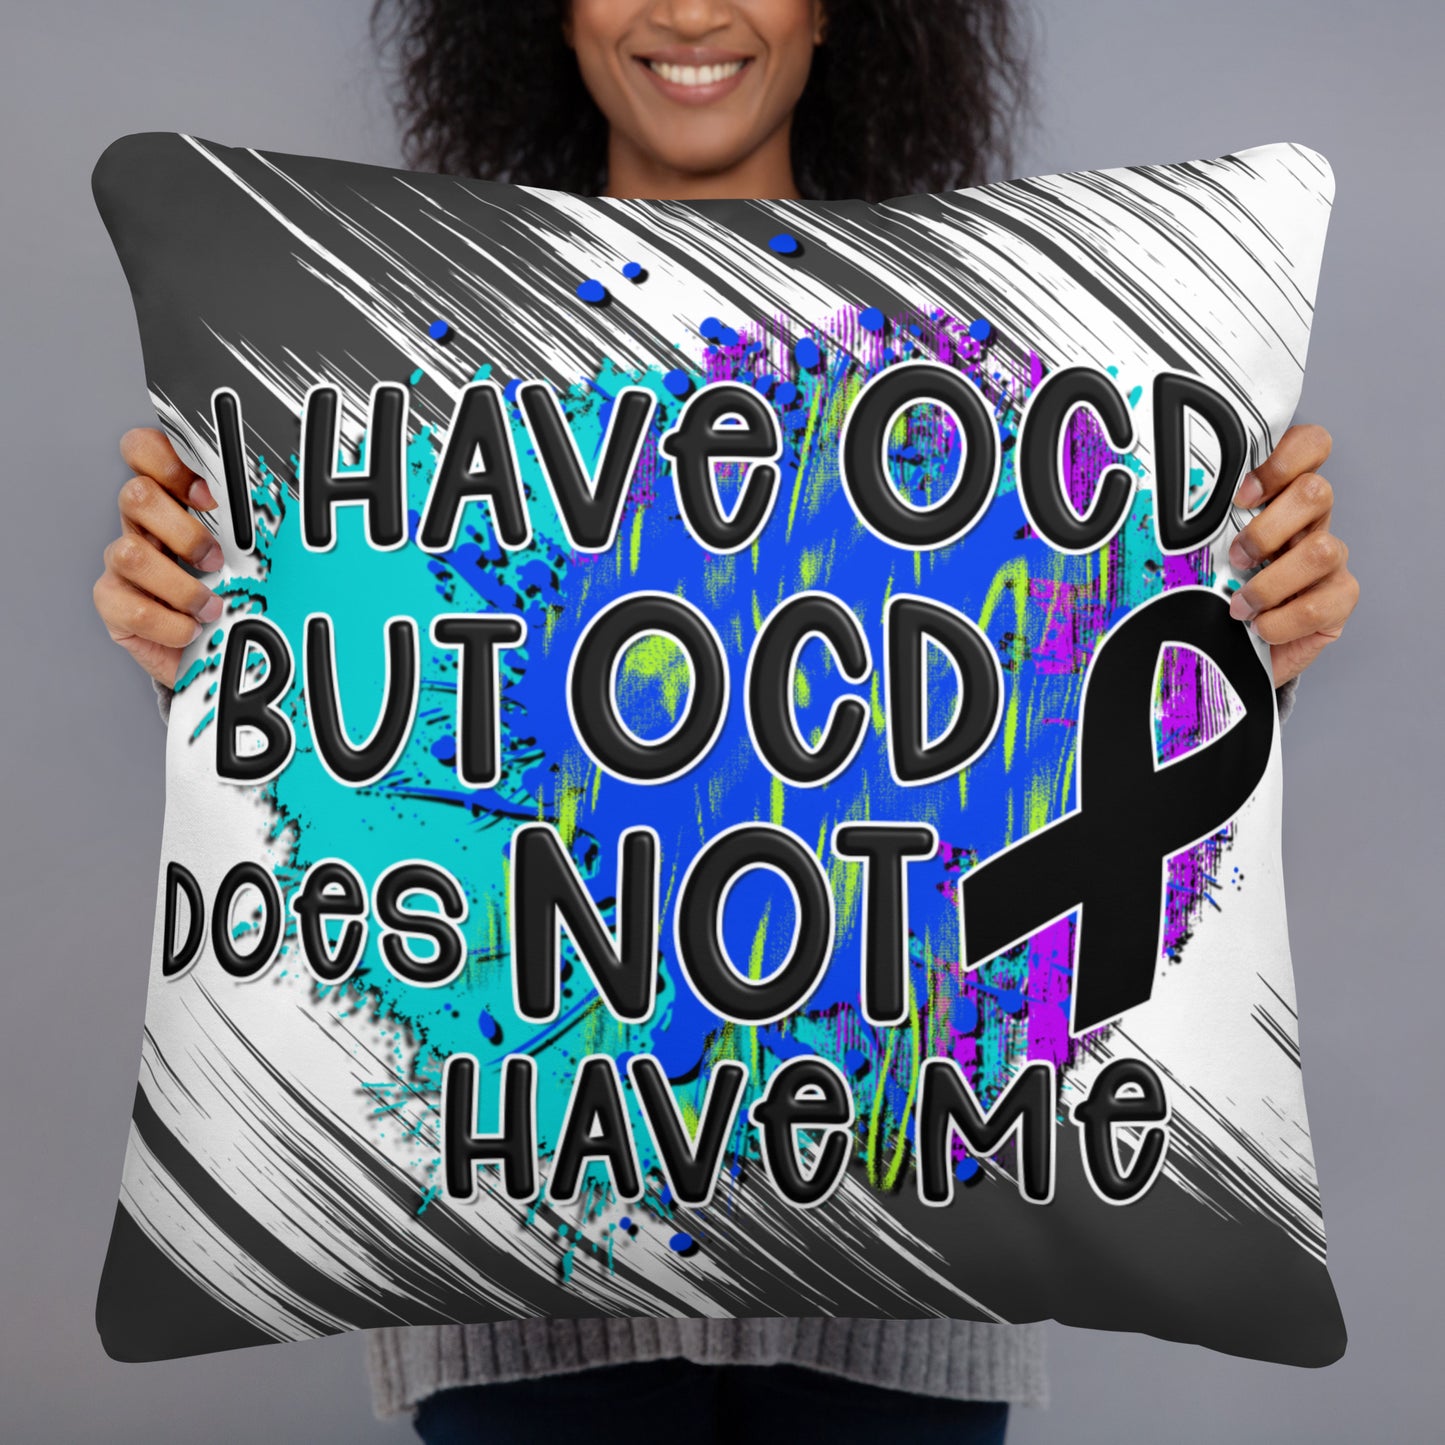 I HAVE OCD BUT OCD DOESN'T HAVE ME- Basic Pillow